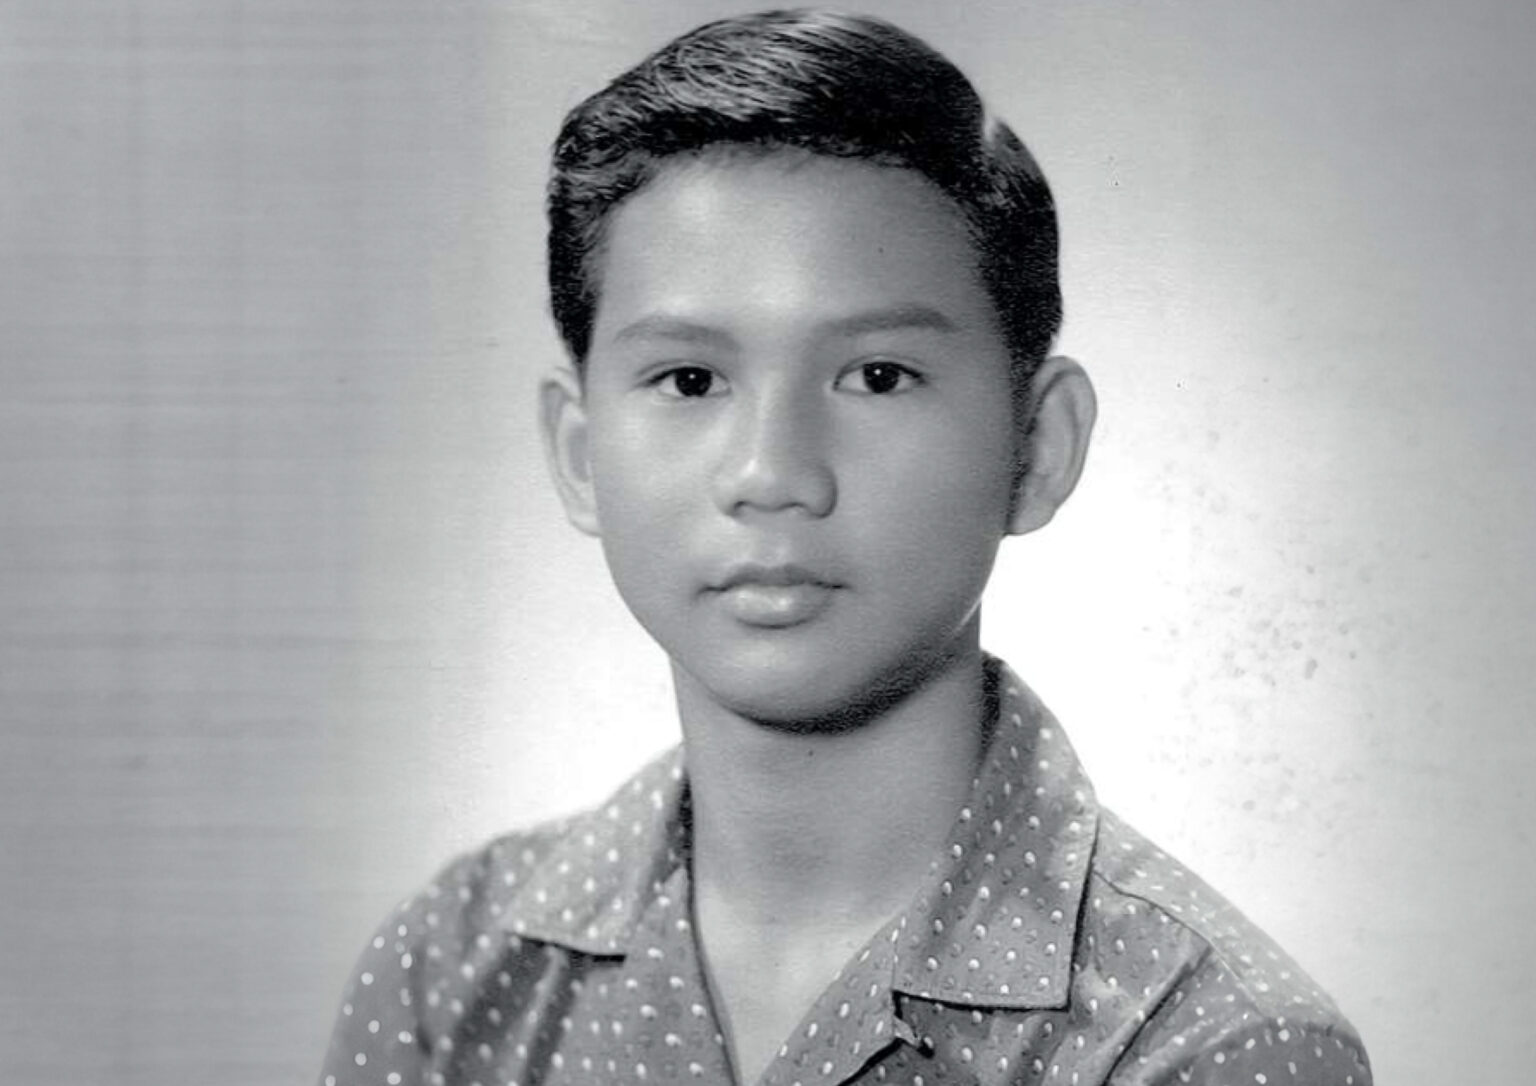 Prabowo Subianto in His Youth